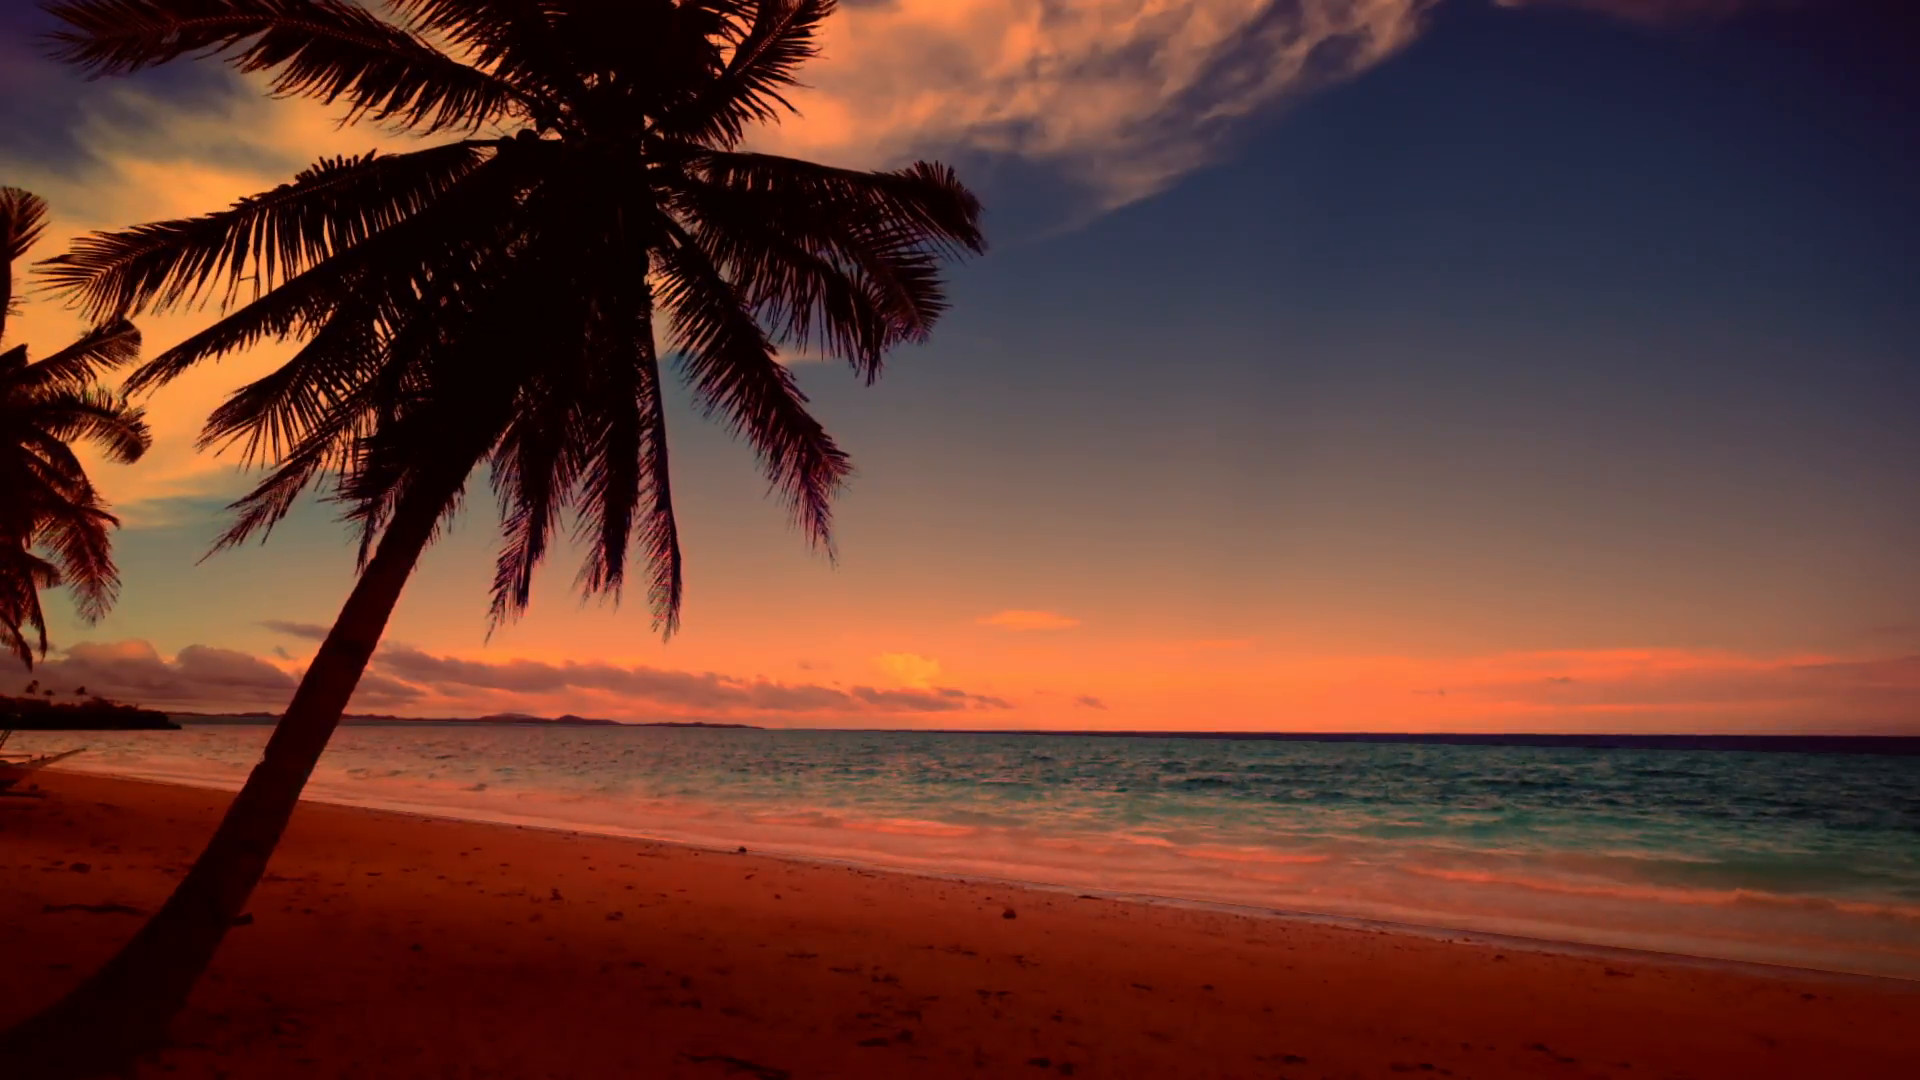 1920x1080 Tropical Sunset Beach With Palm Tree Stock Photo & More Pictures